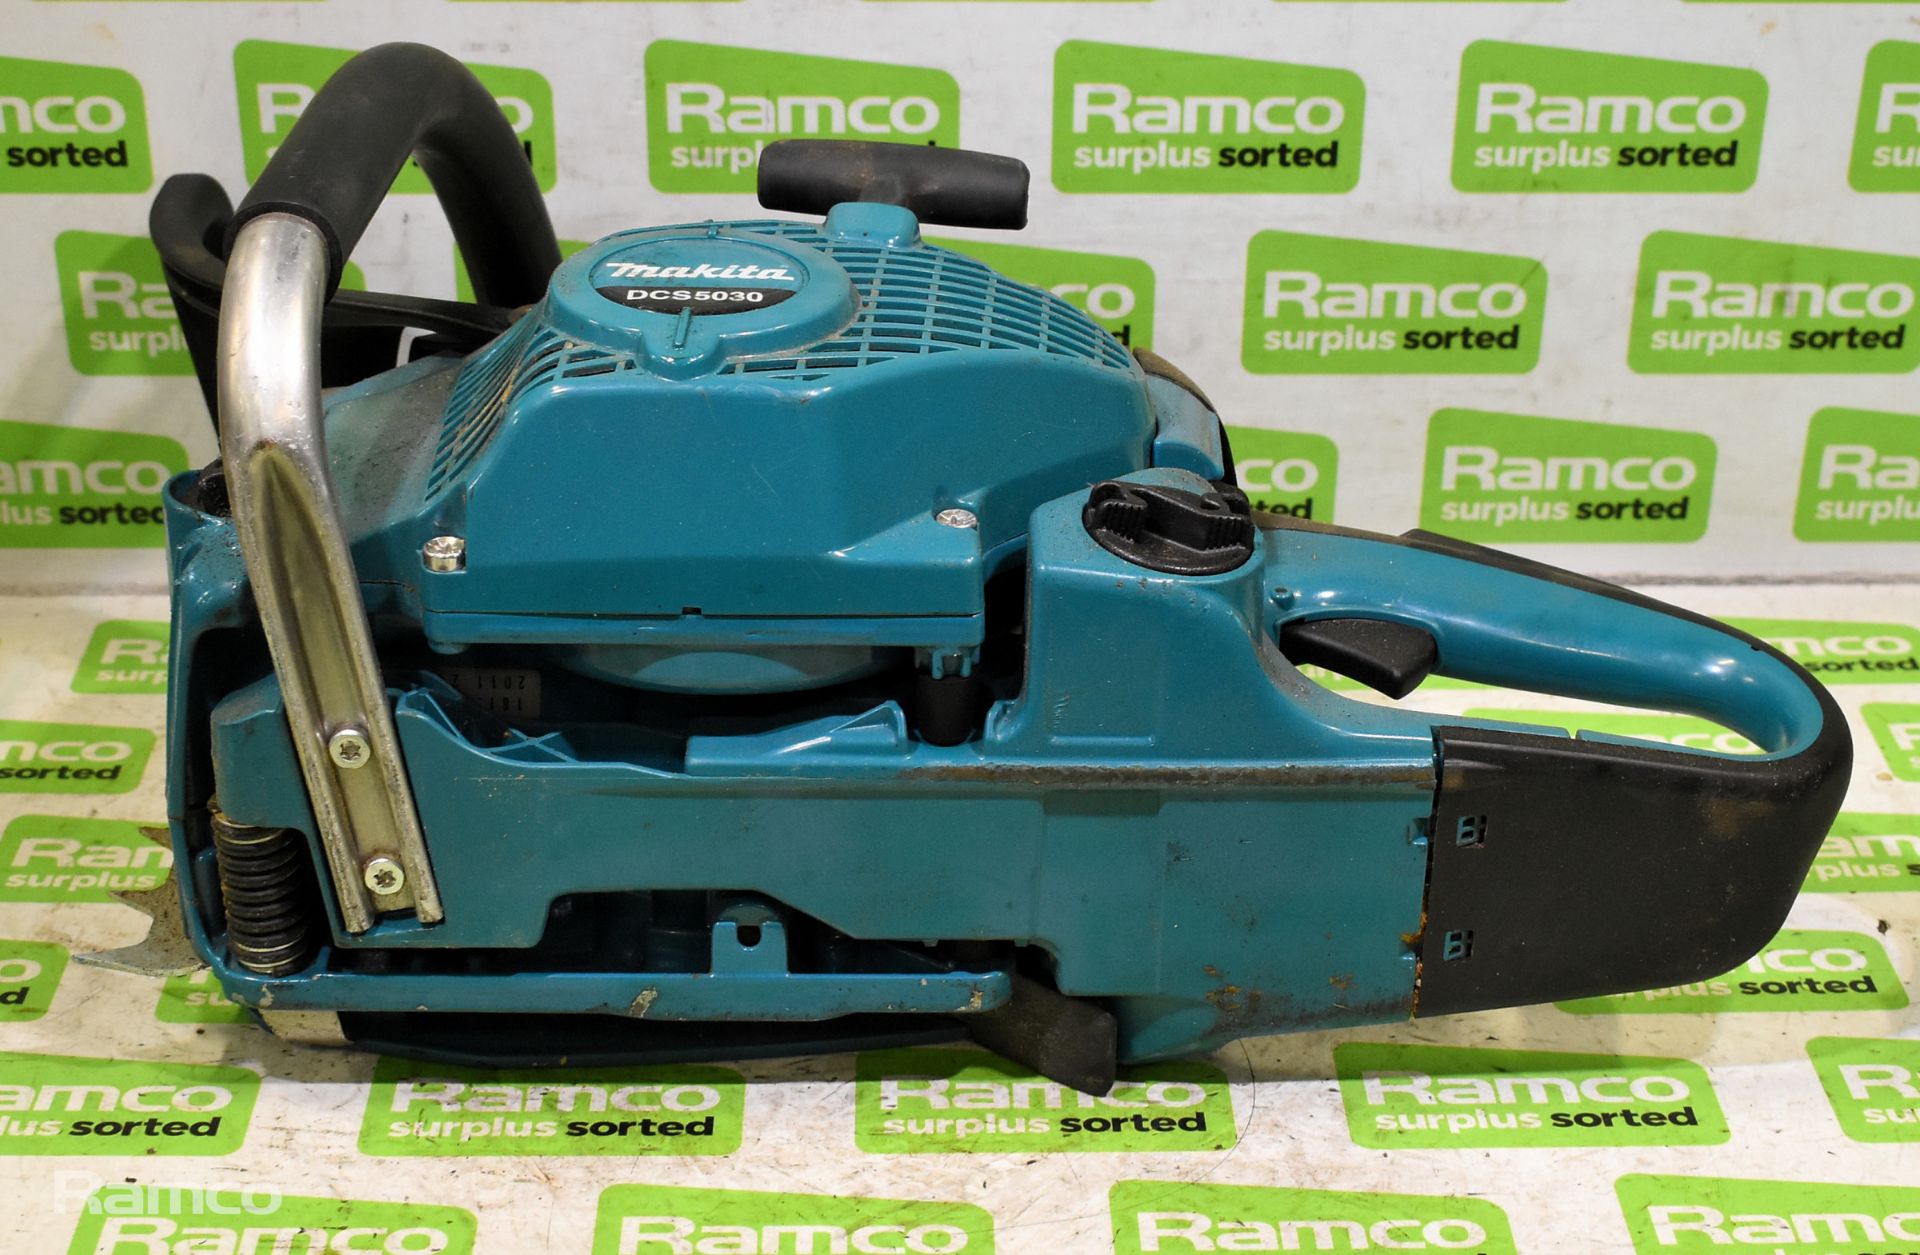 6x Makita DCS5030 50cc petrol chainsaw - BODIES ONLY - AS SPARES & REPAIRS - Image 8 of 33